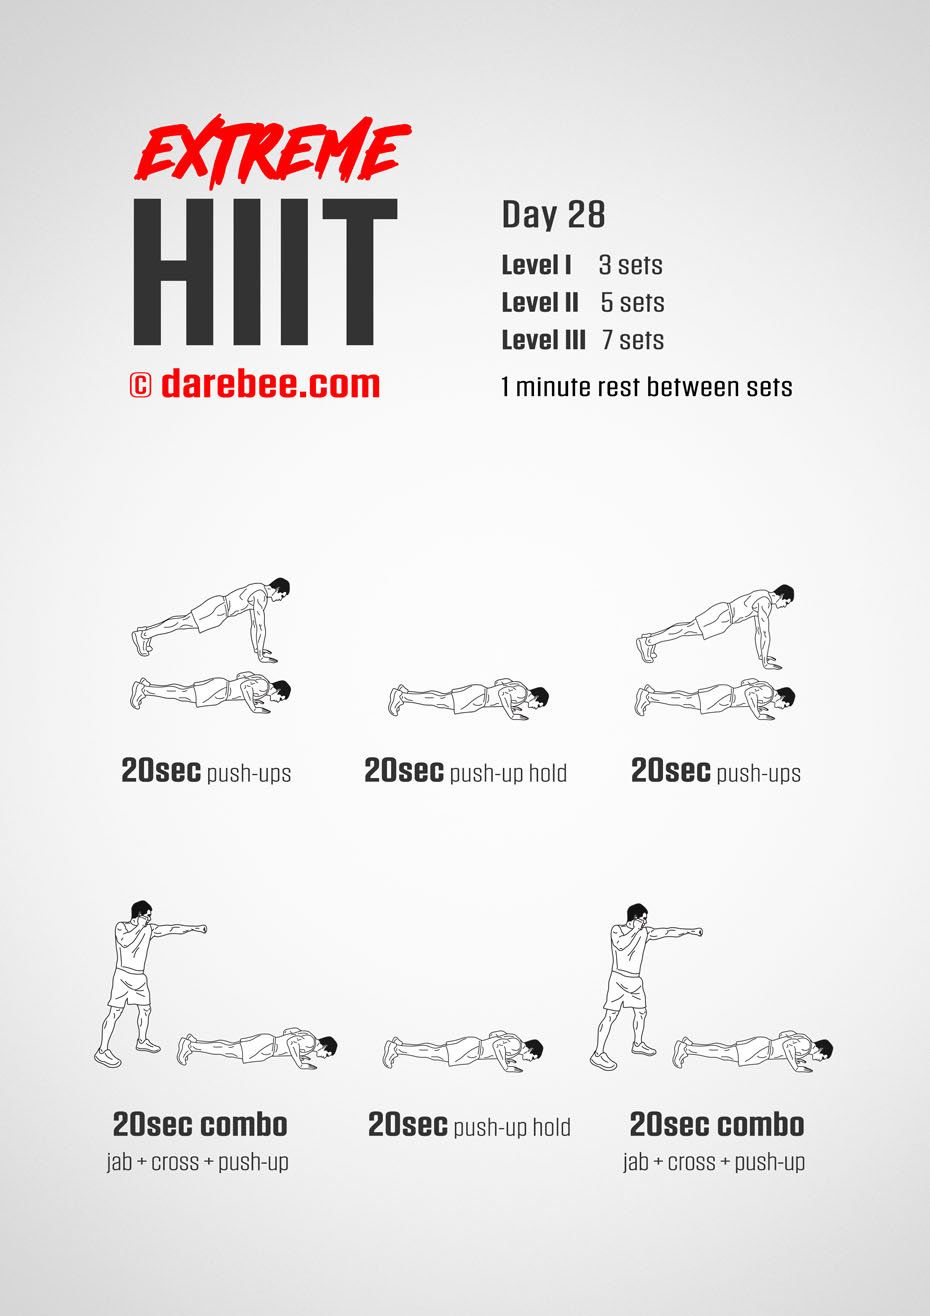 Extreme HIIT by DAREBEE